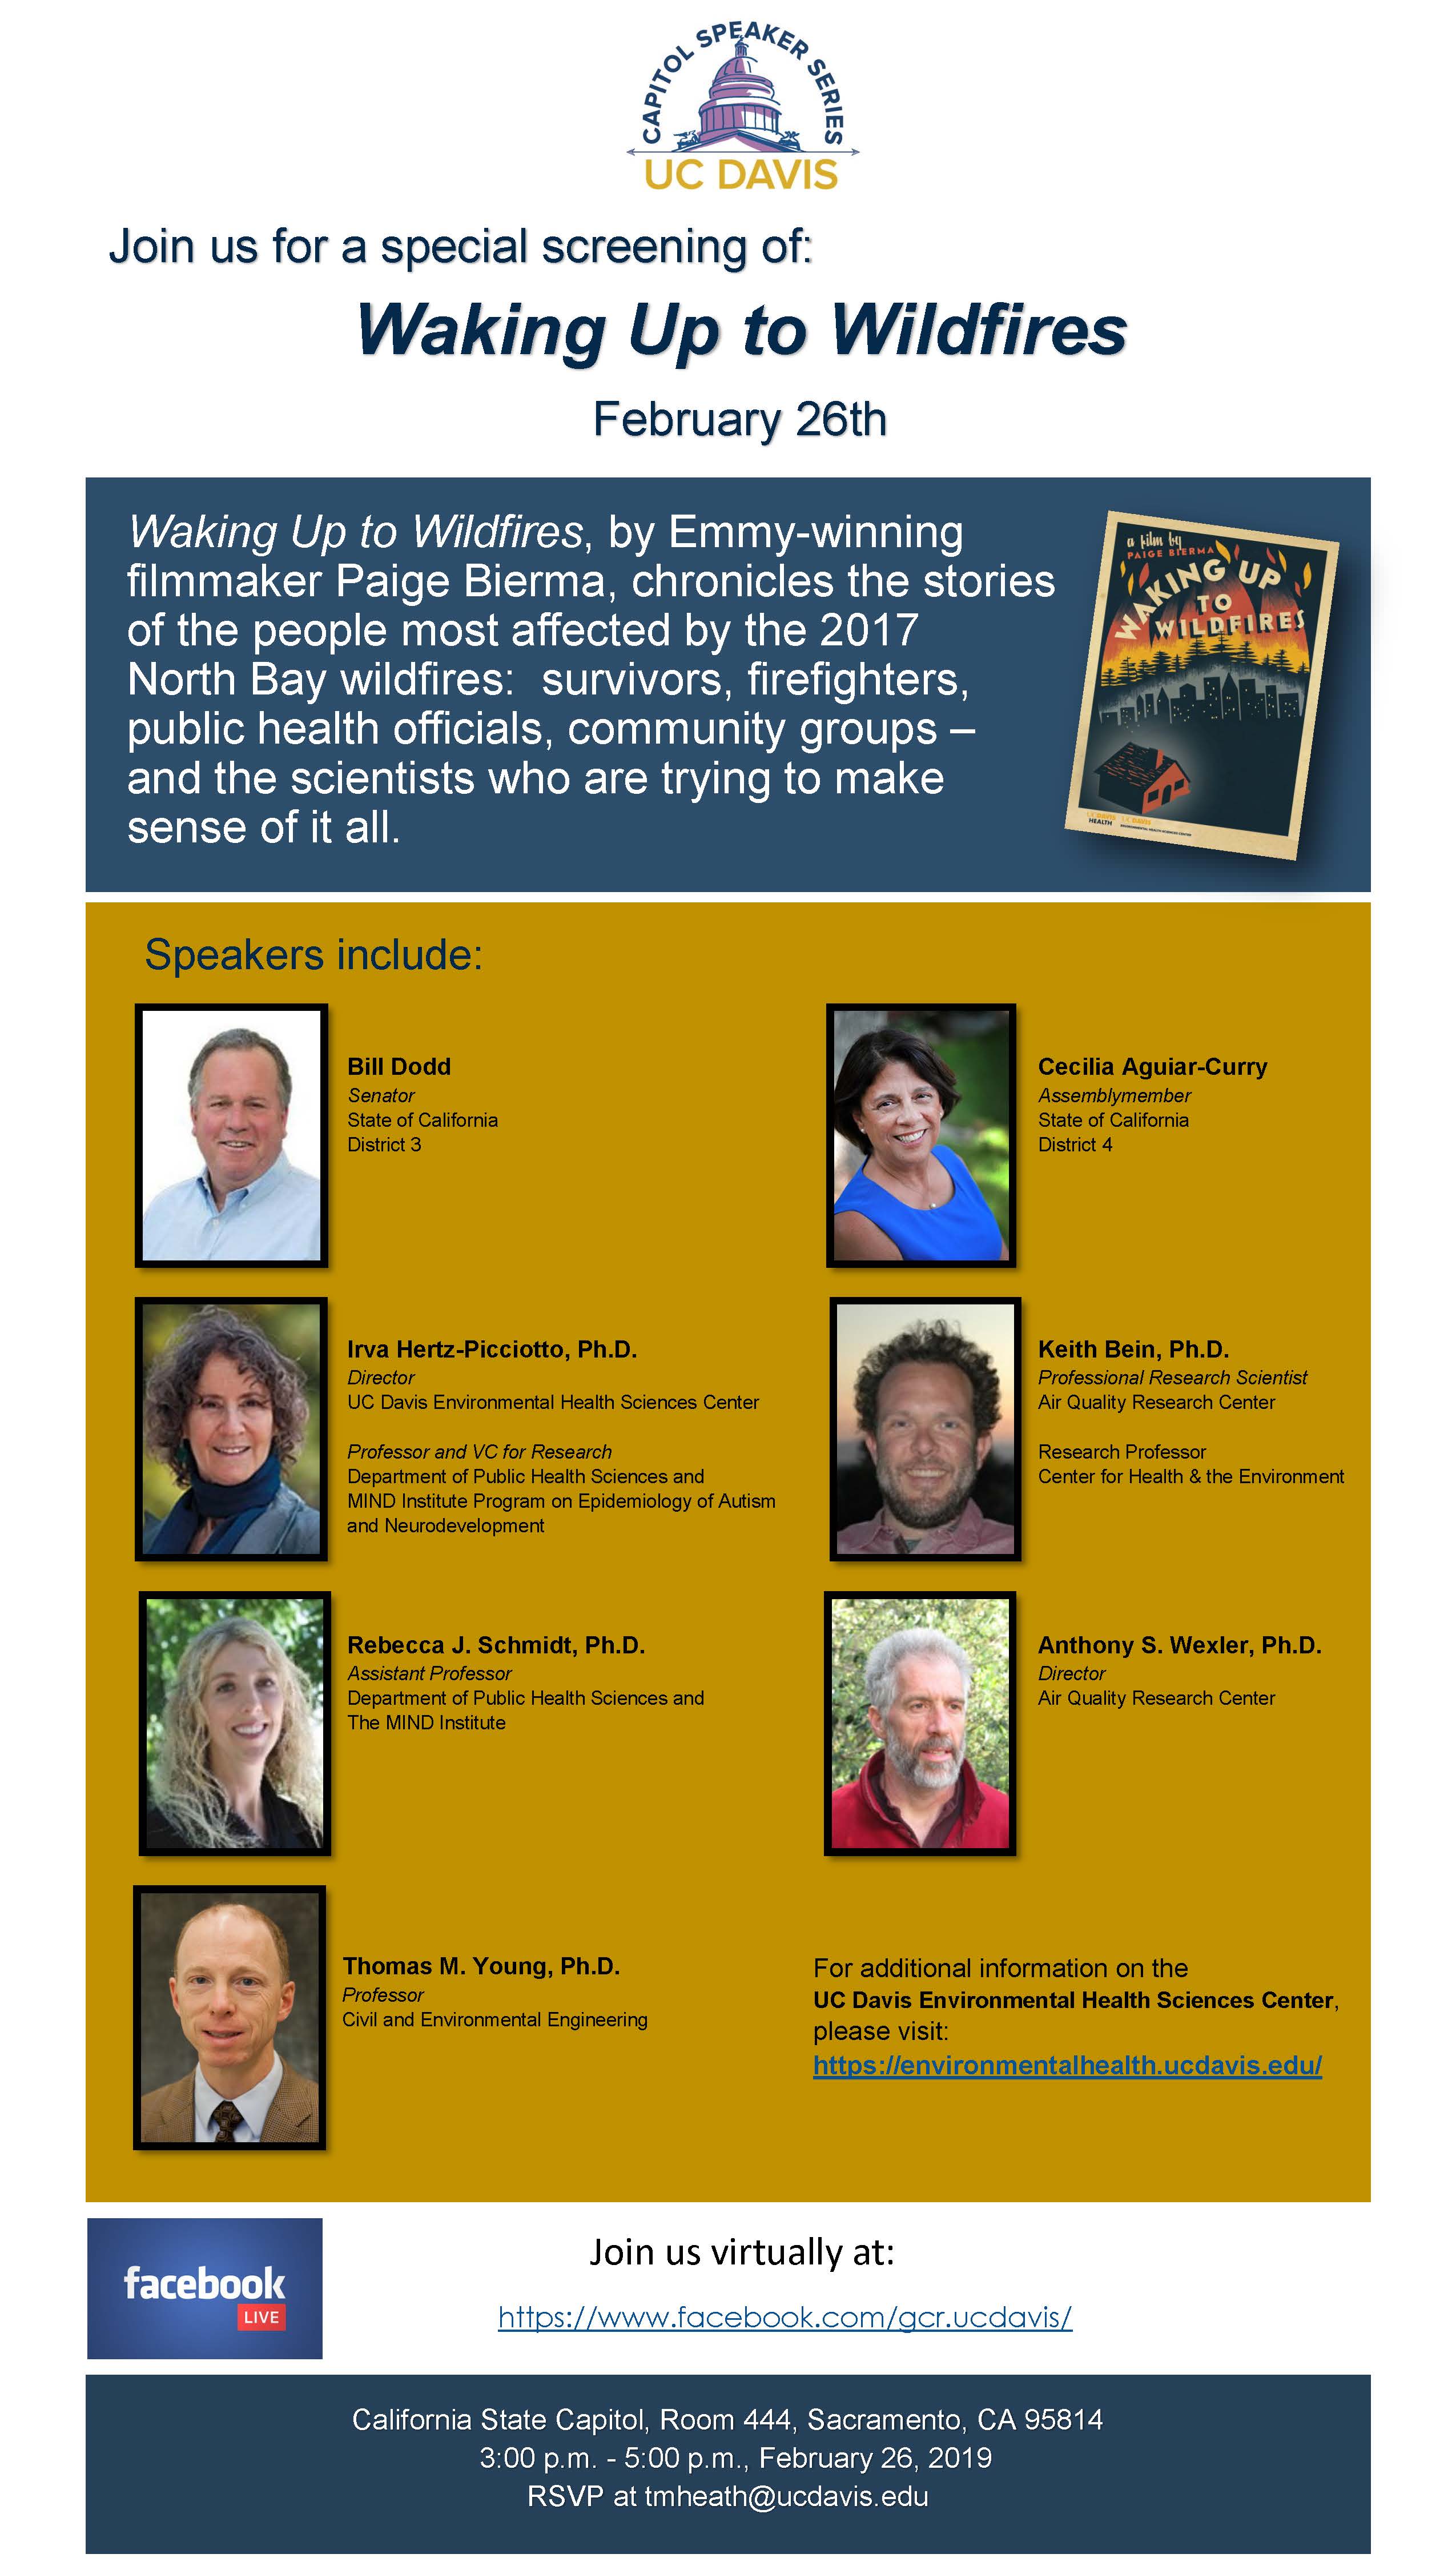 Image: Waking Up to Wildfires poster, plus details of the film's contents, which include those affected and concerned by the North Bay wildfires. This is followed by the list of speakers.